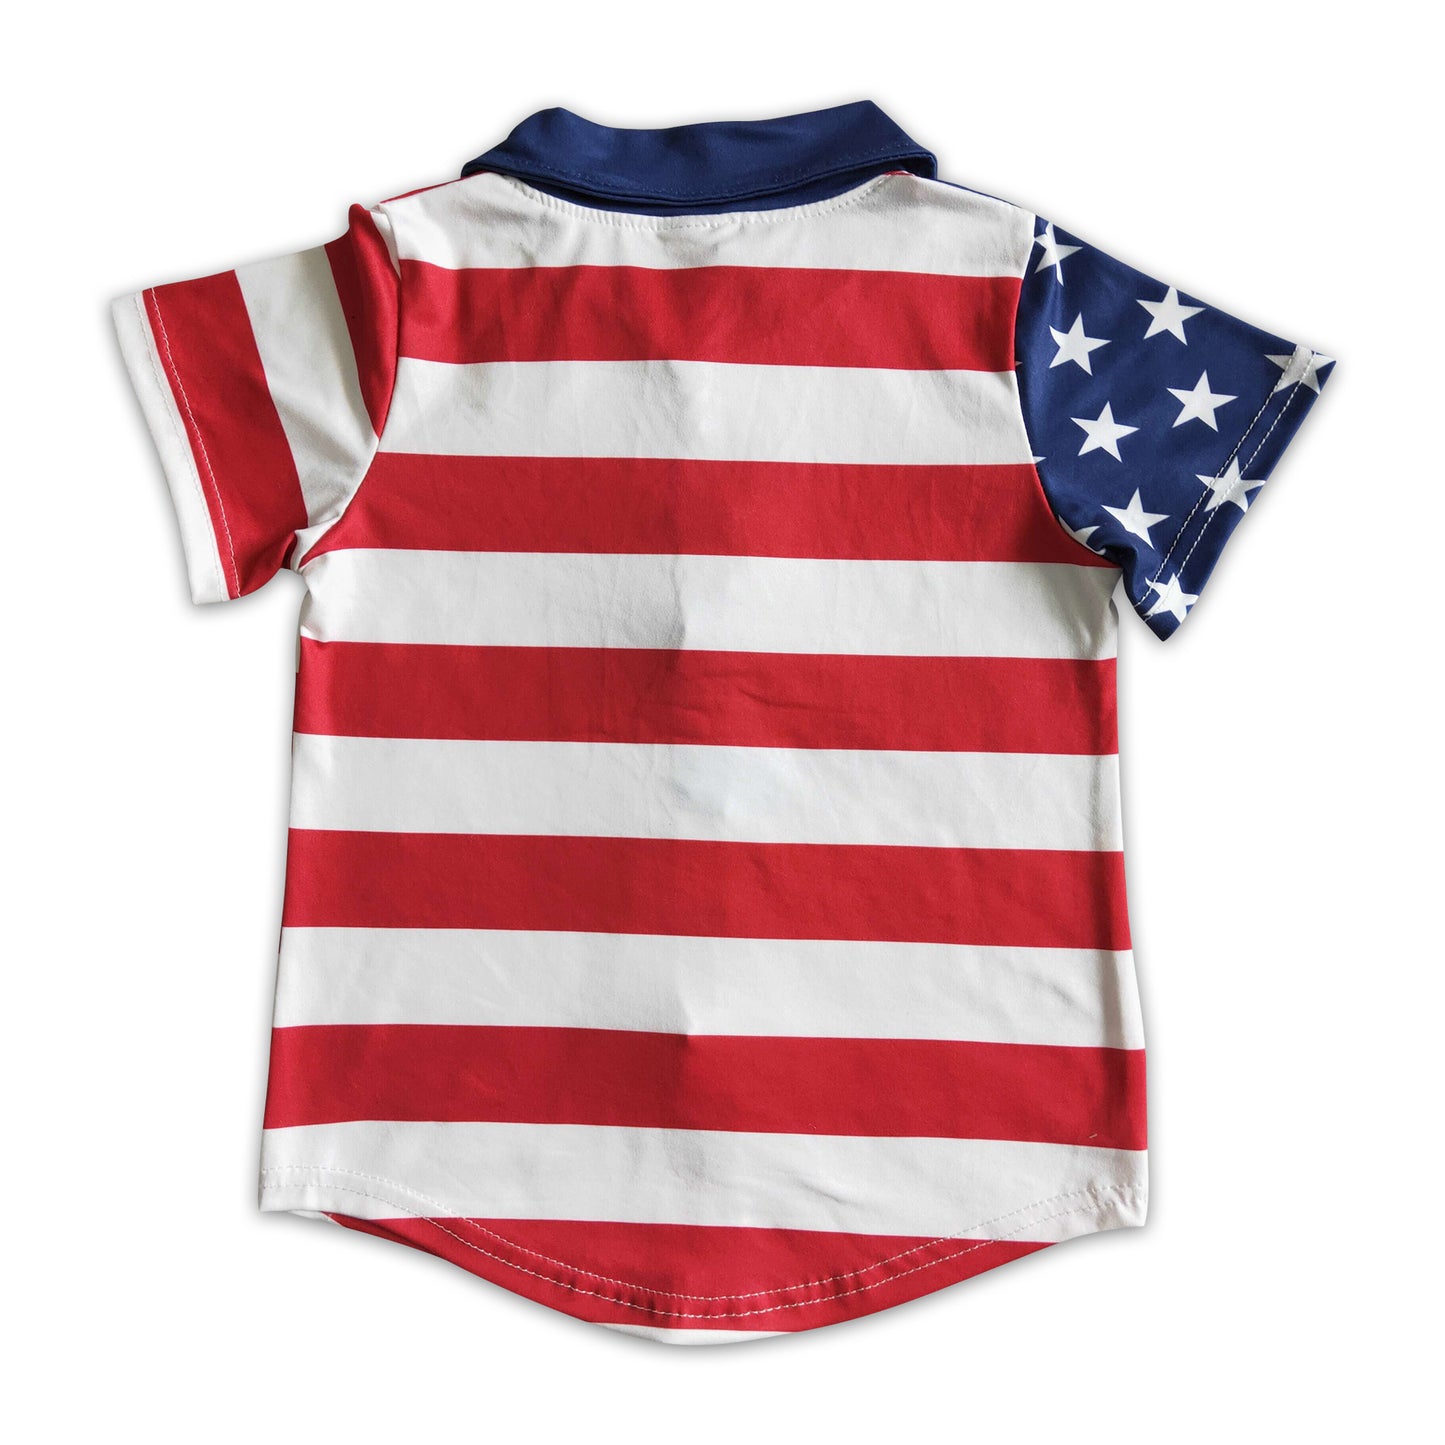 Star and stripe short sleeve boy 4th of july polo shirt